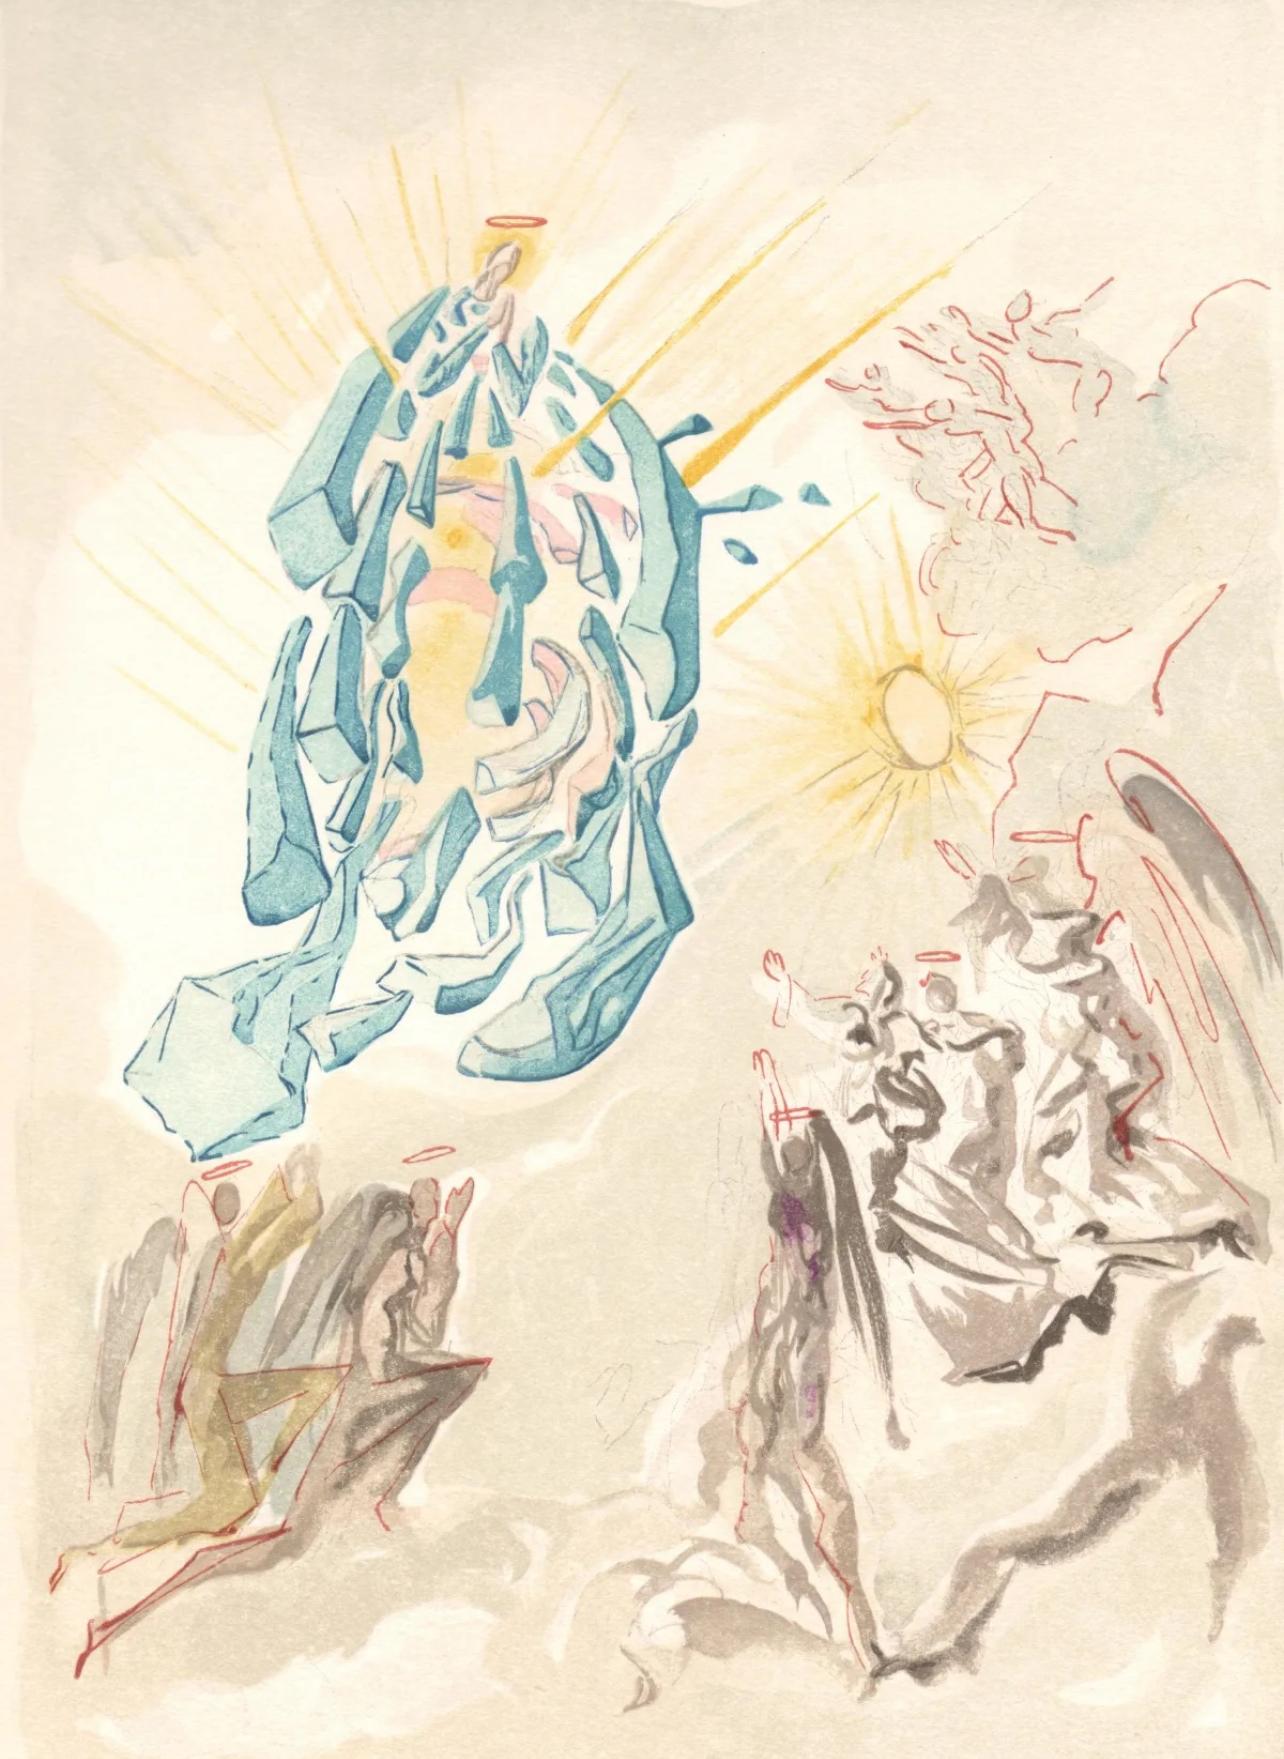 Artist: Salvador Dali (1904-1989)
Year: 1963
Medium: Wood engraving in colors on Rives BFK paper
Inscription: Unsigned and unnumbered, as issued
Edition: 4765 in French; 3188 in Italian, plus proofs
Catalogue Raisonne Reference: Michler & Löpsinger